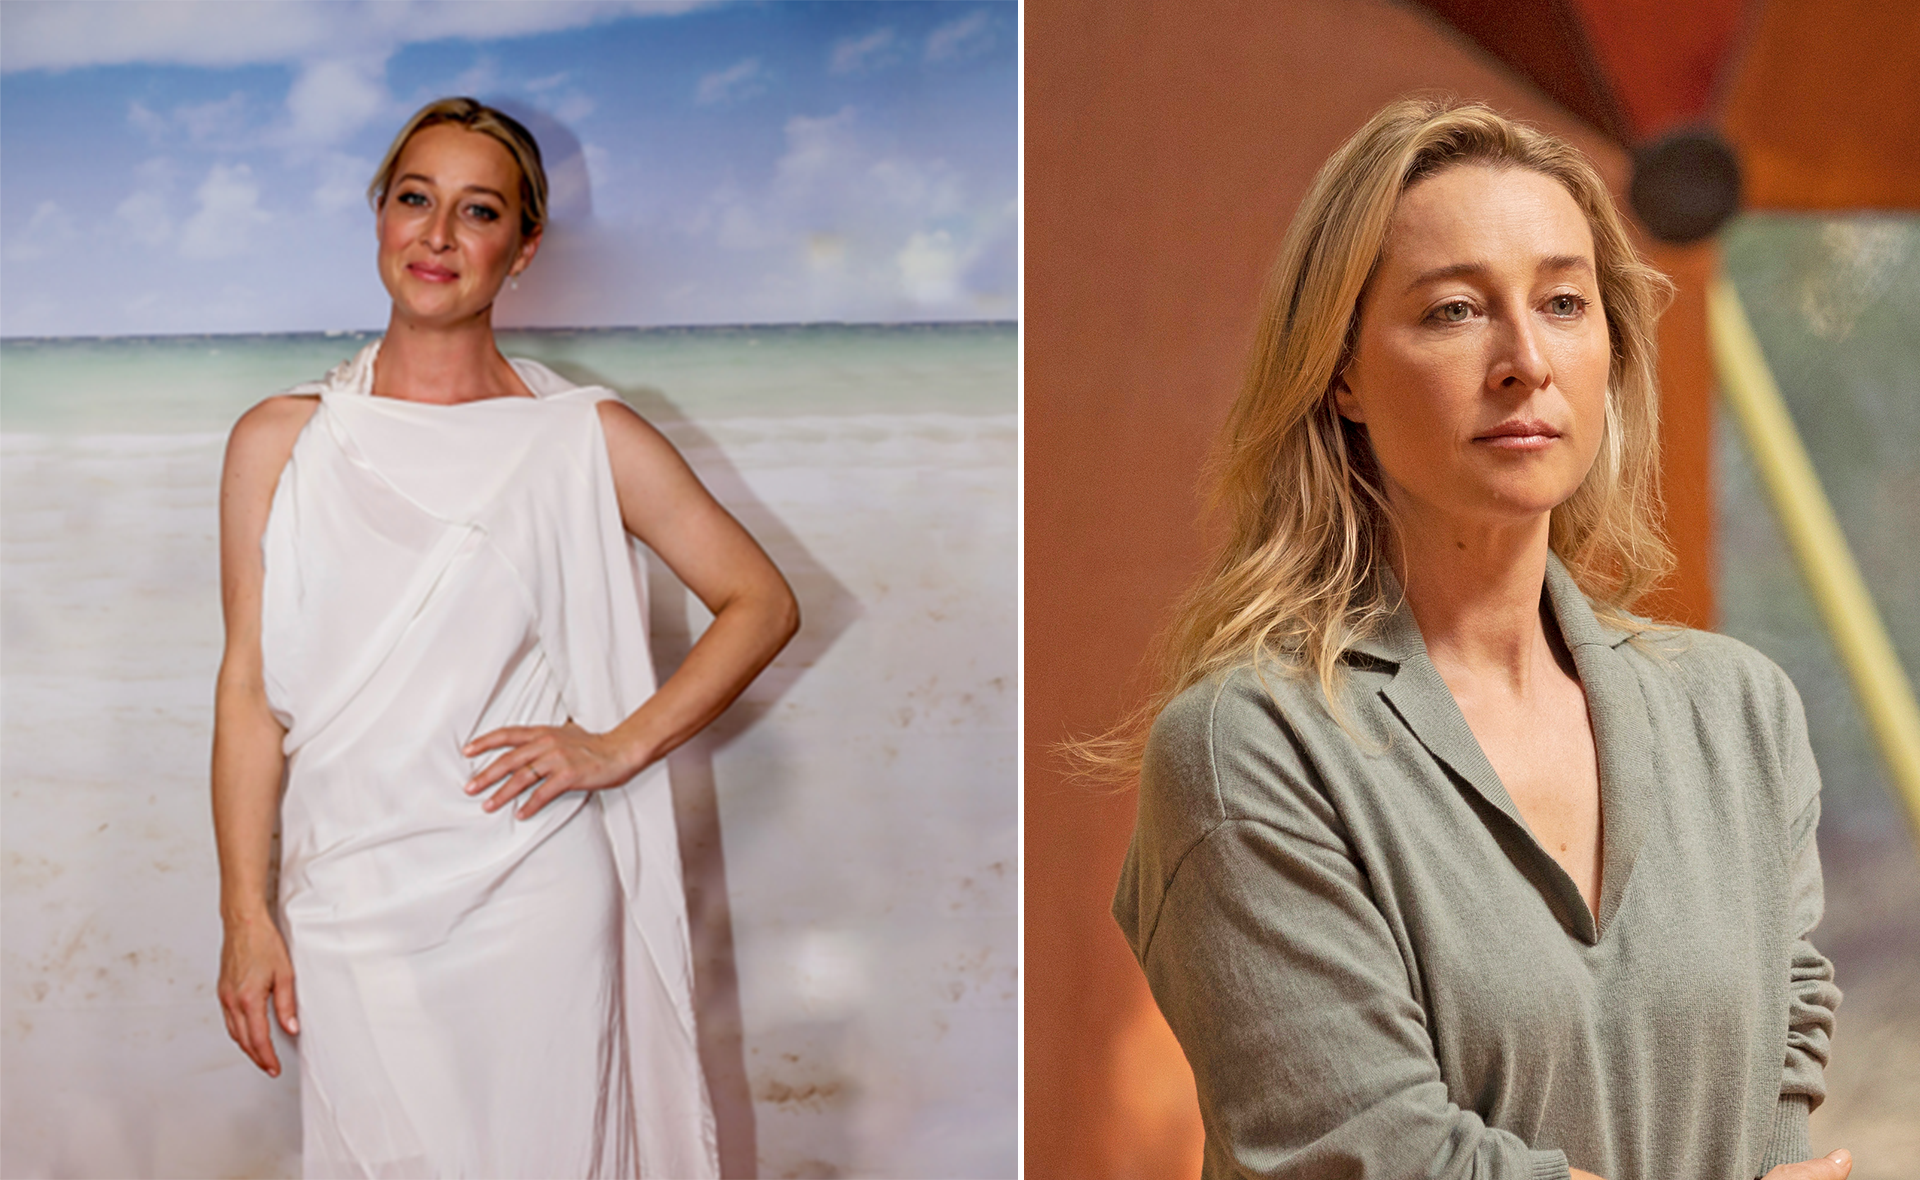 EXCLUSIVE: Asher Keddie on her “challenging” Nine Perfect Strangers gig and what it was like working with Nicole Kidman